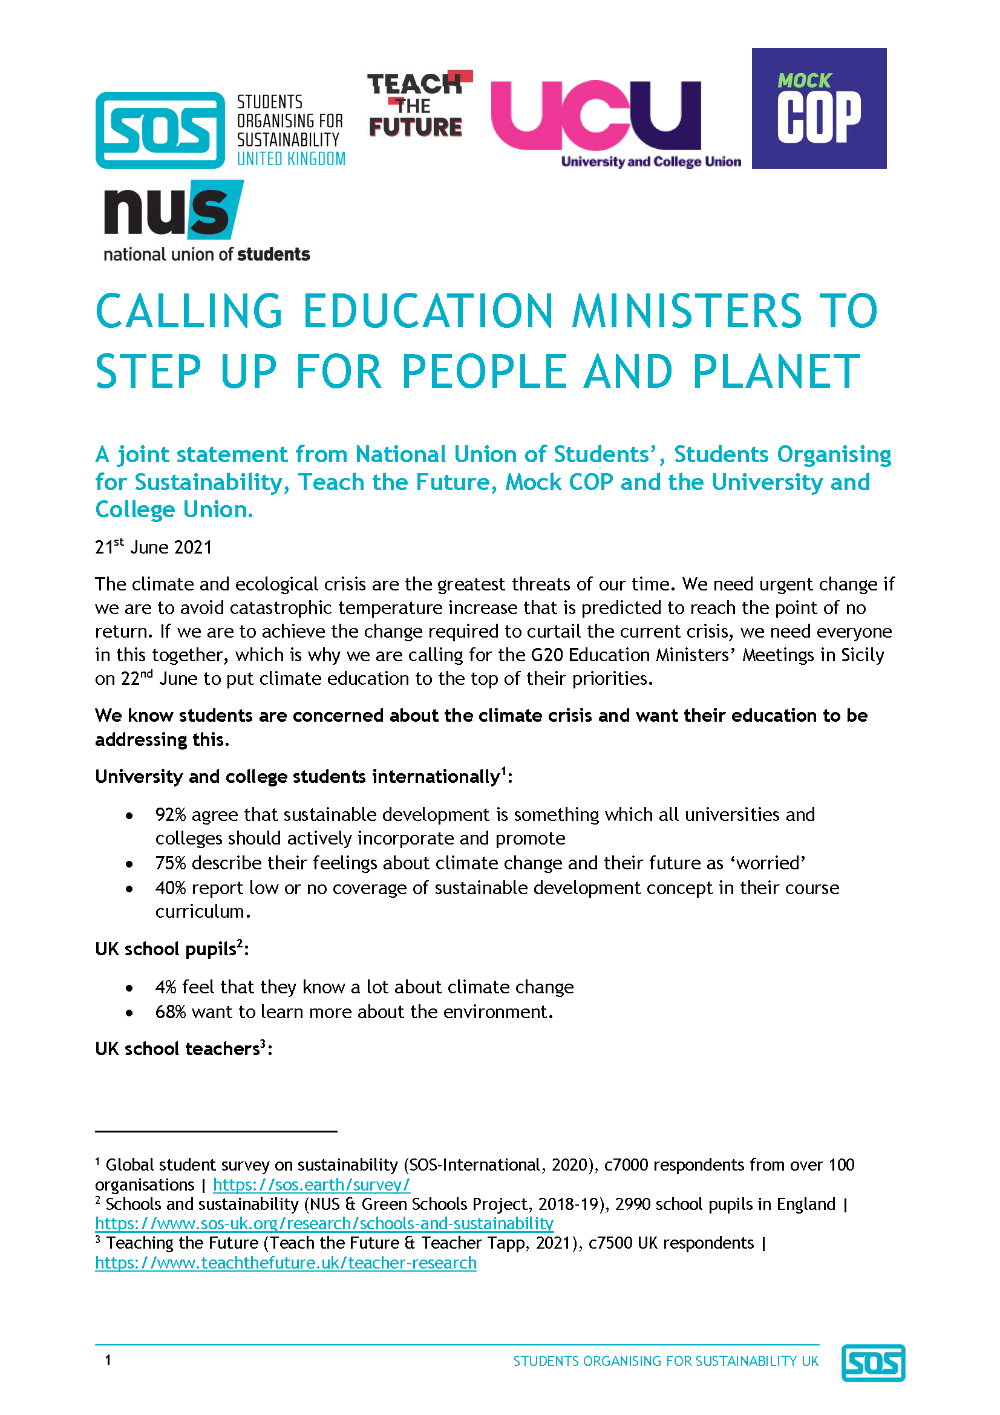 G20 education minister meeting joint statement page 1, Jun 21